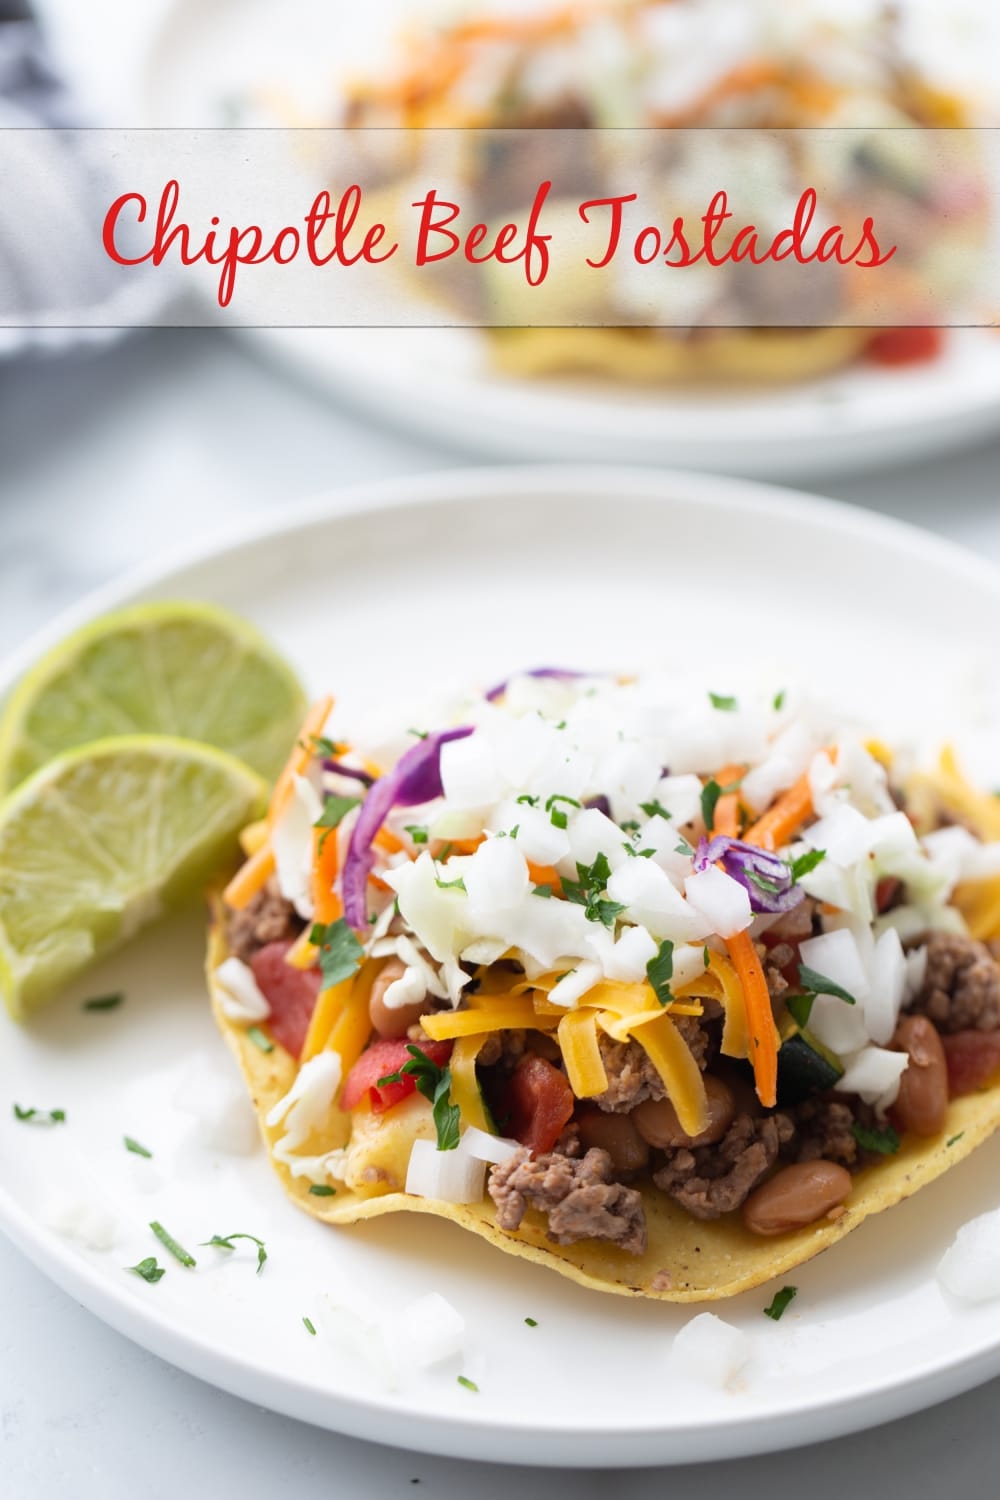 Chipotle Beef Tostadas - crunchy tortillas topped with a flavor packed beef and veggie mixture. This is an easy last minute meal that feels a little more sophisticated.  via @cmpollak1